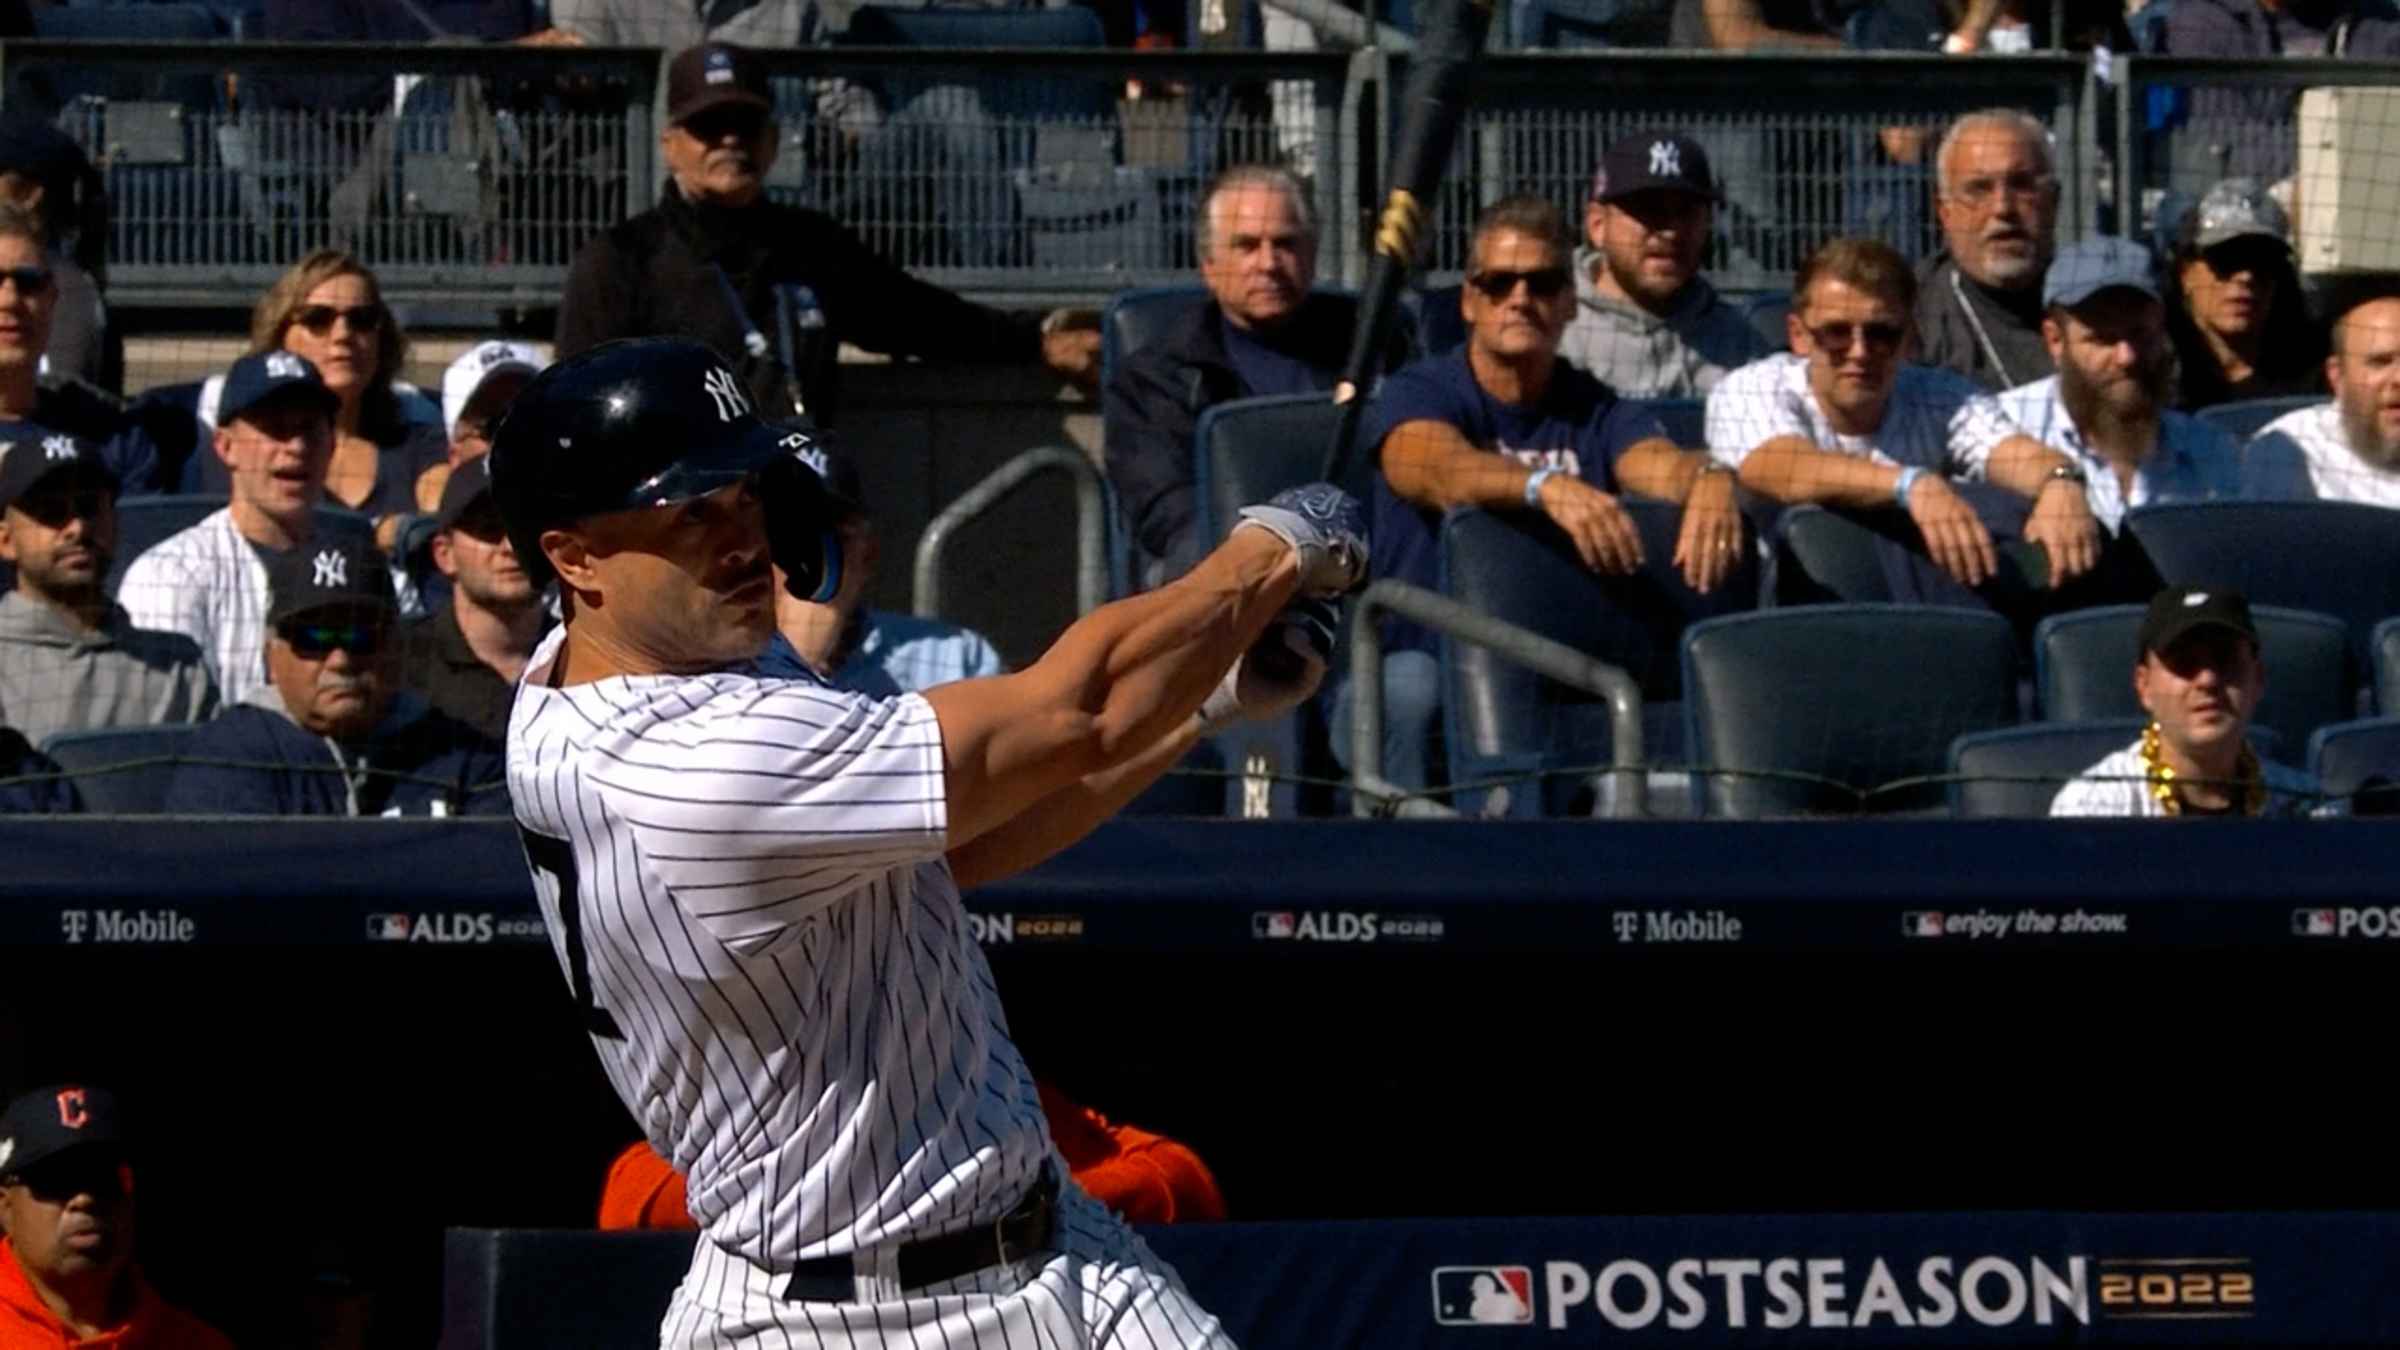 Giancarlo Stanton New York Yankees Unsigned Hits A Two-Run Home Run in The 2022 MLB All-Star Game Photograph